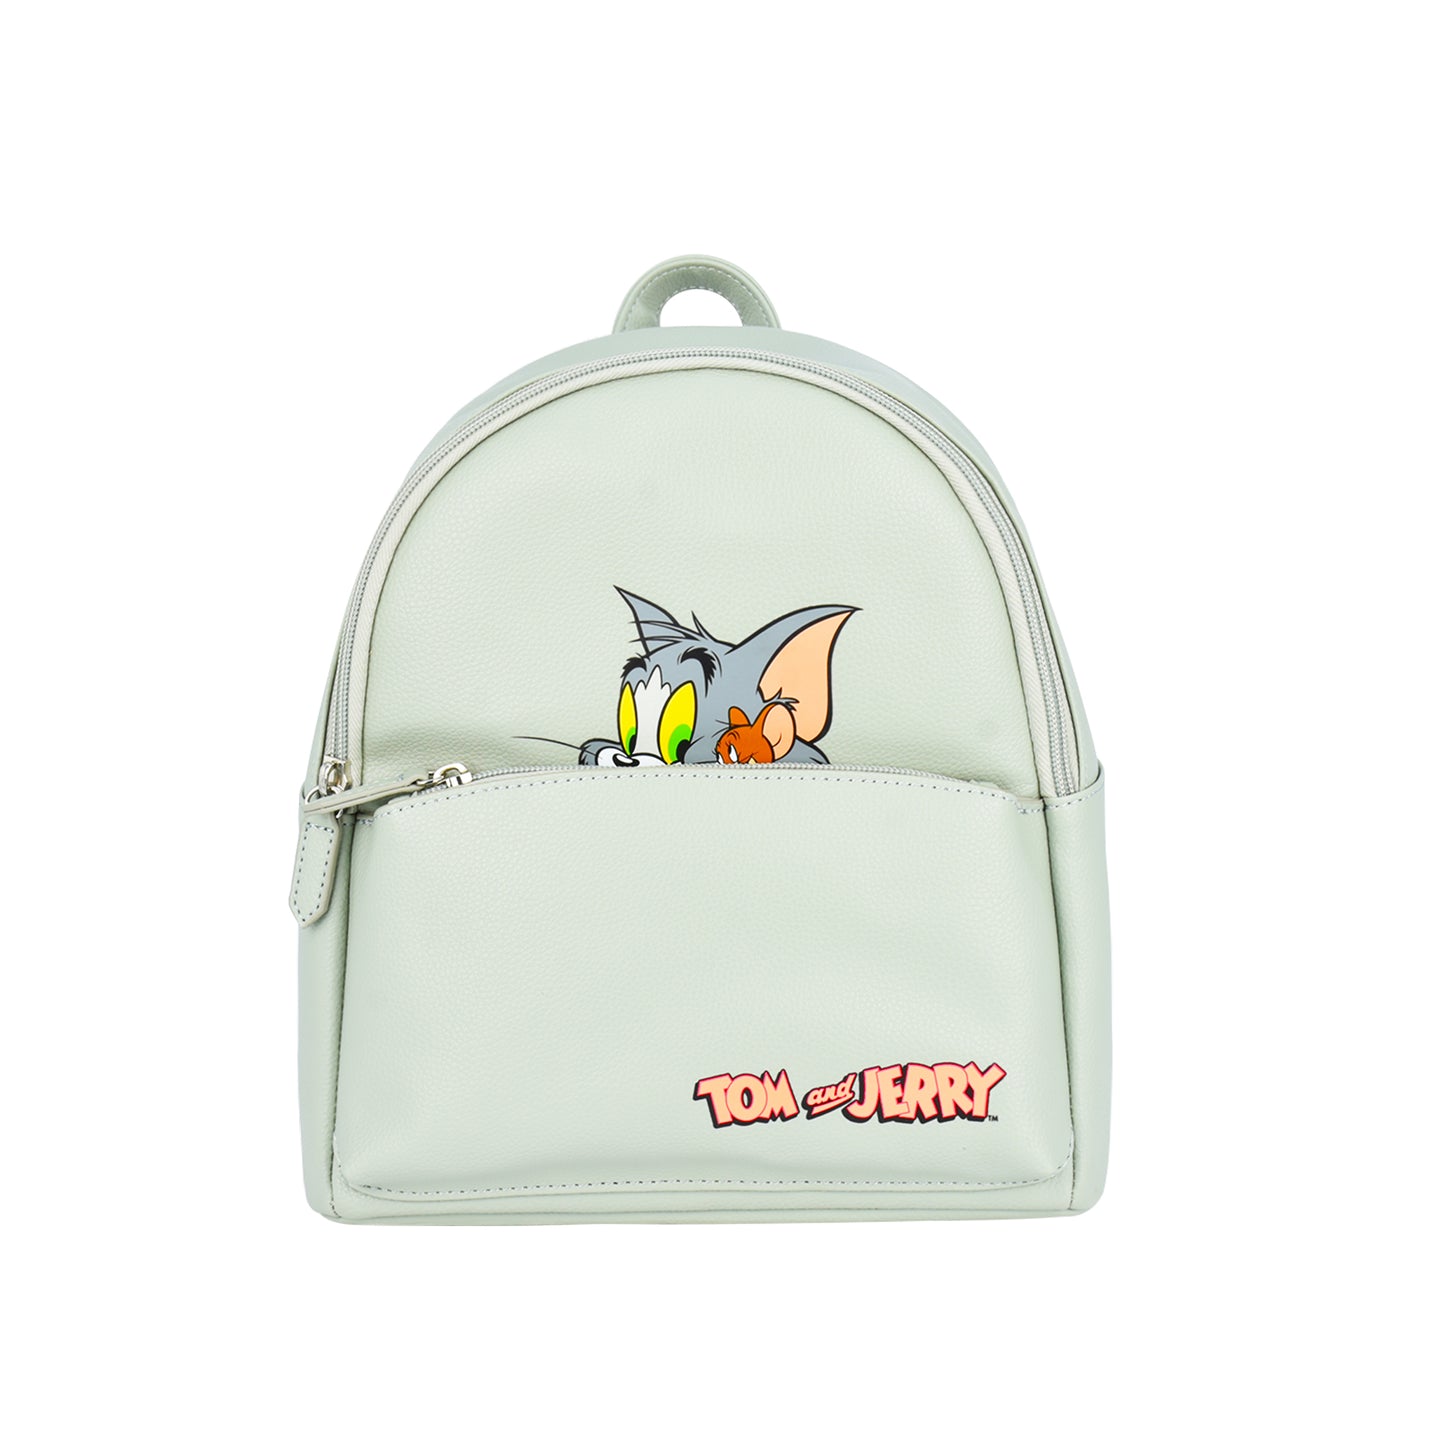 Tom and Jerry Mini Backpack, Small Bookbag, Pale Green, 9 Inch